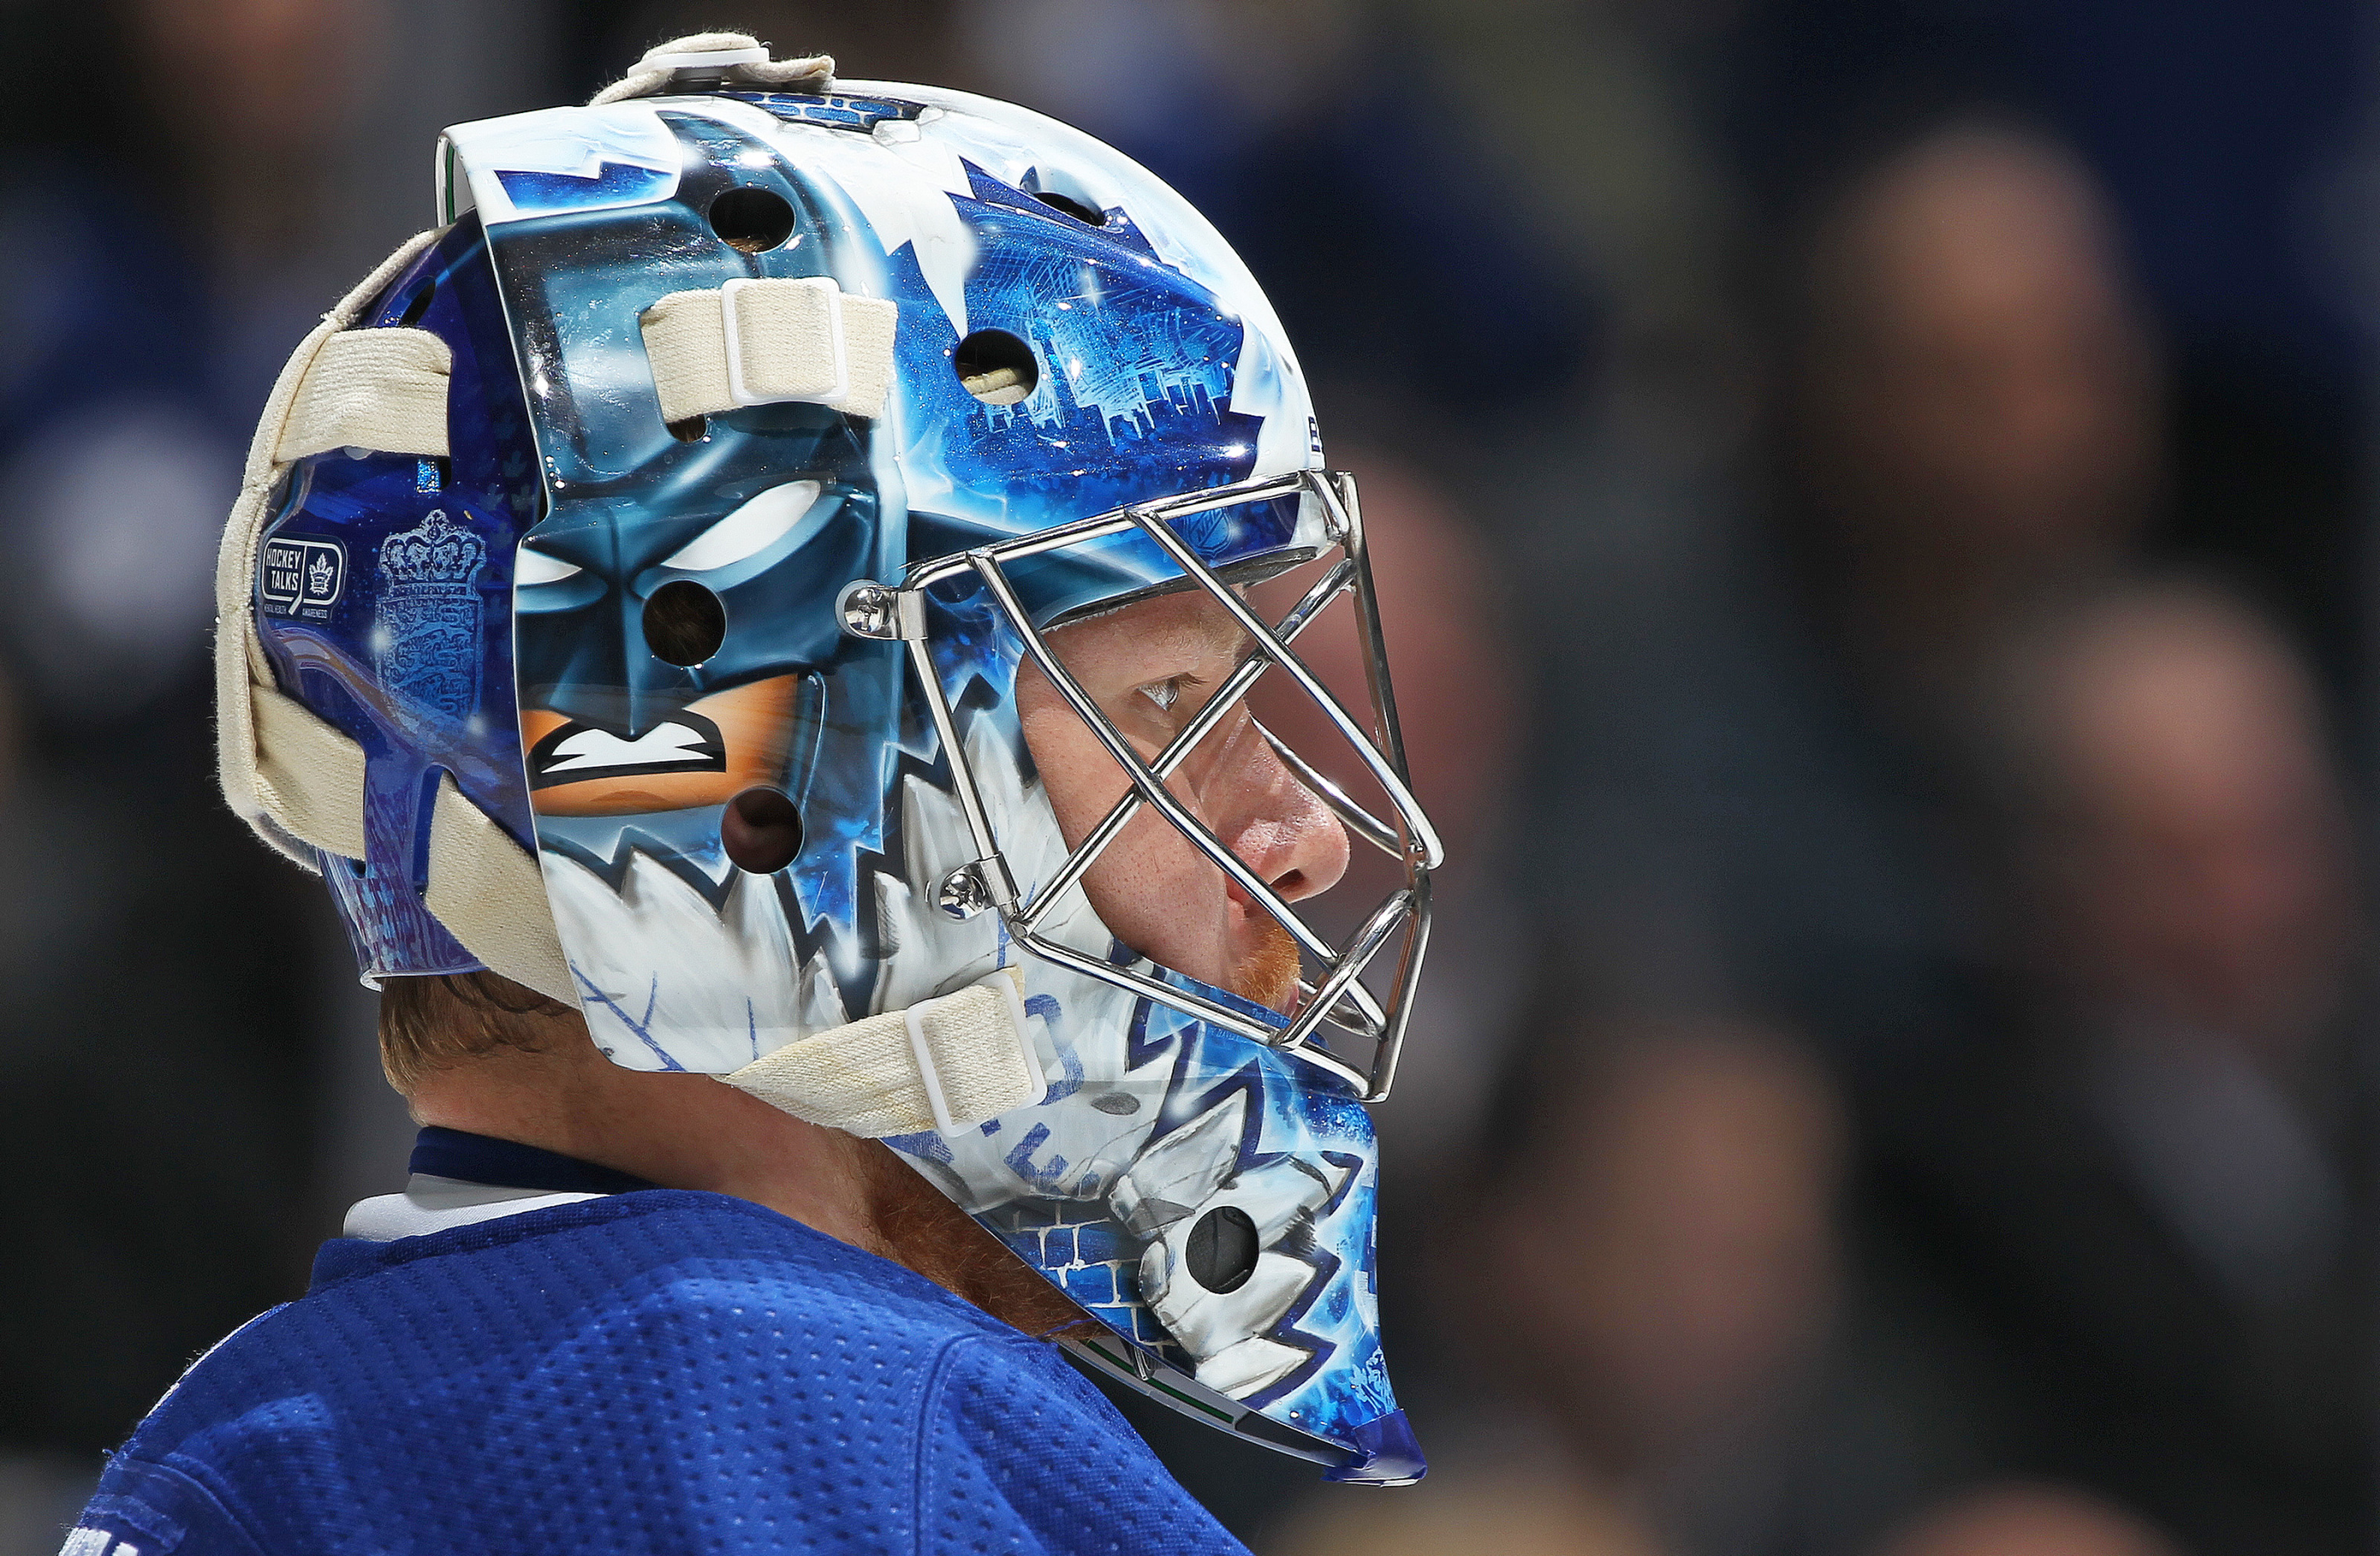 Toronto Maple Leafs: Andersen gets well deserved all-star selection